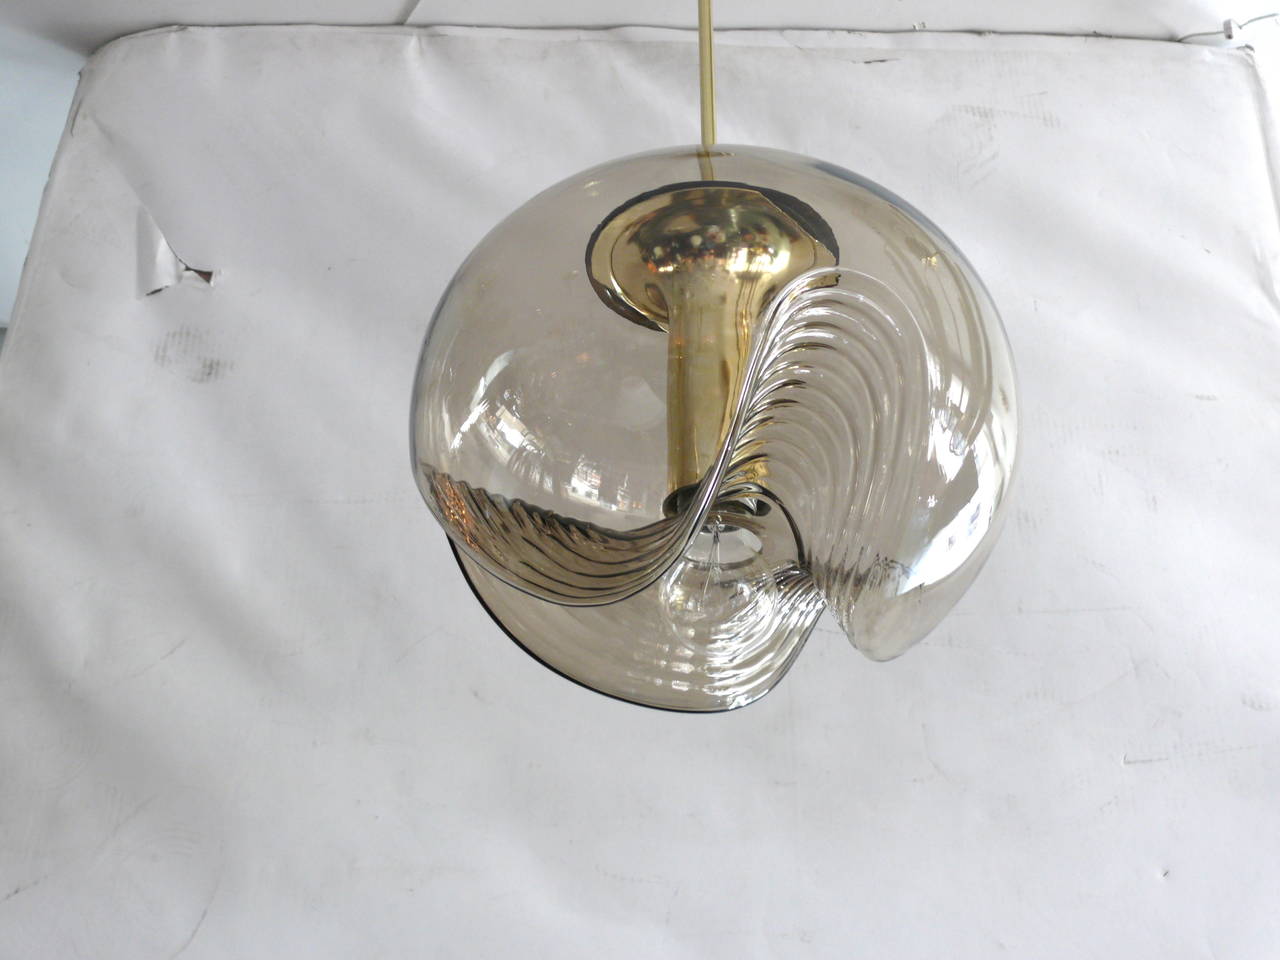 Fantastic biomorphic pendant light by Koch and Lowy. Amber colored hand blown glass with brass hardware. Large scale pendant. Newly rewired. Two available in this size. Smaller sizes also available.